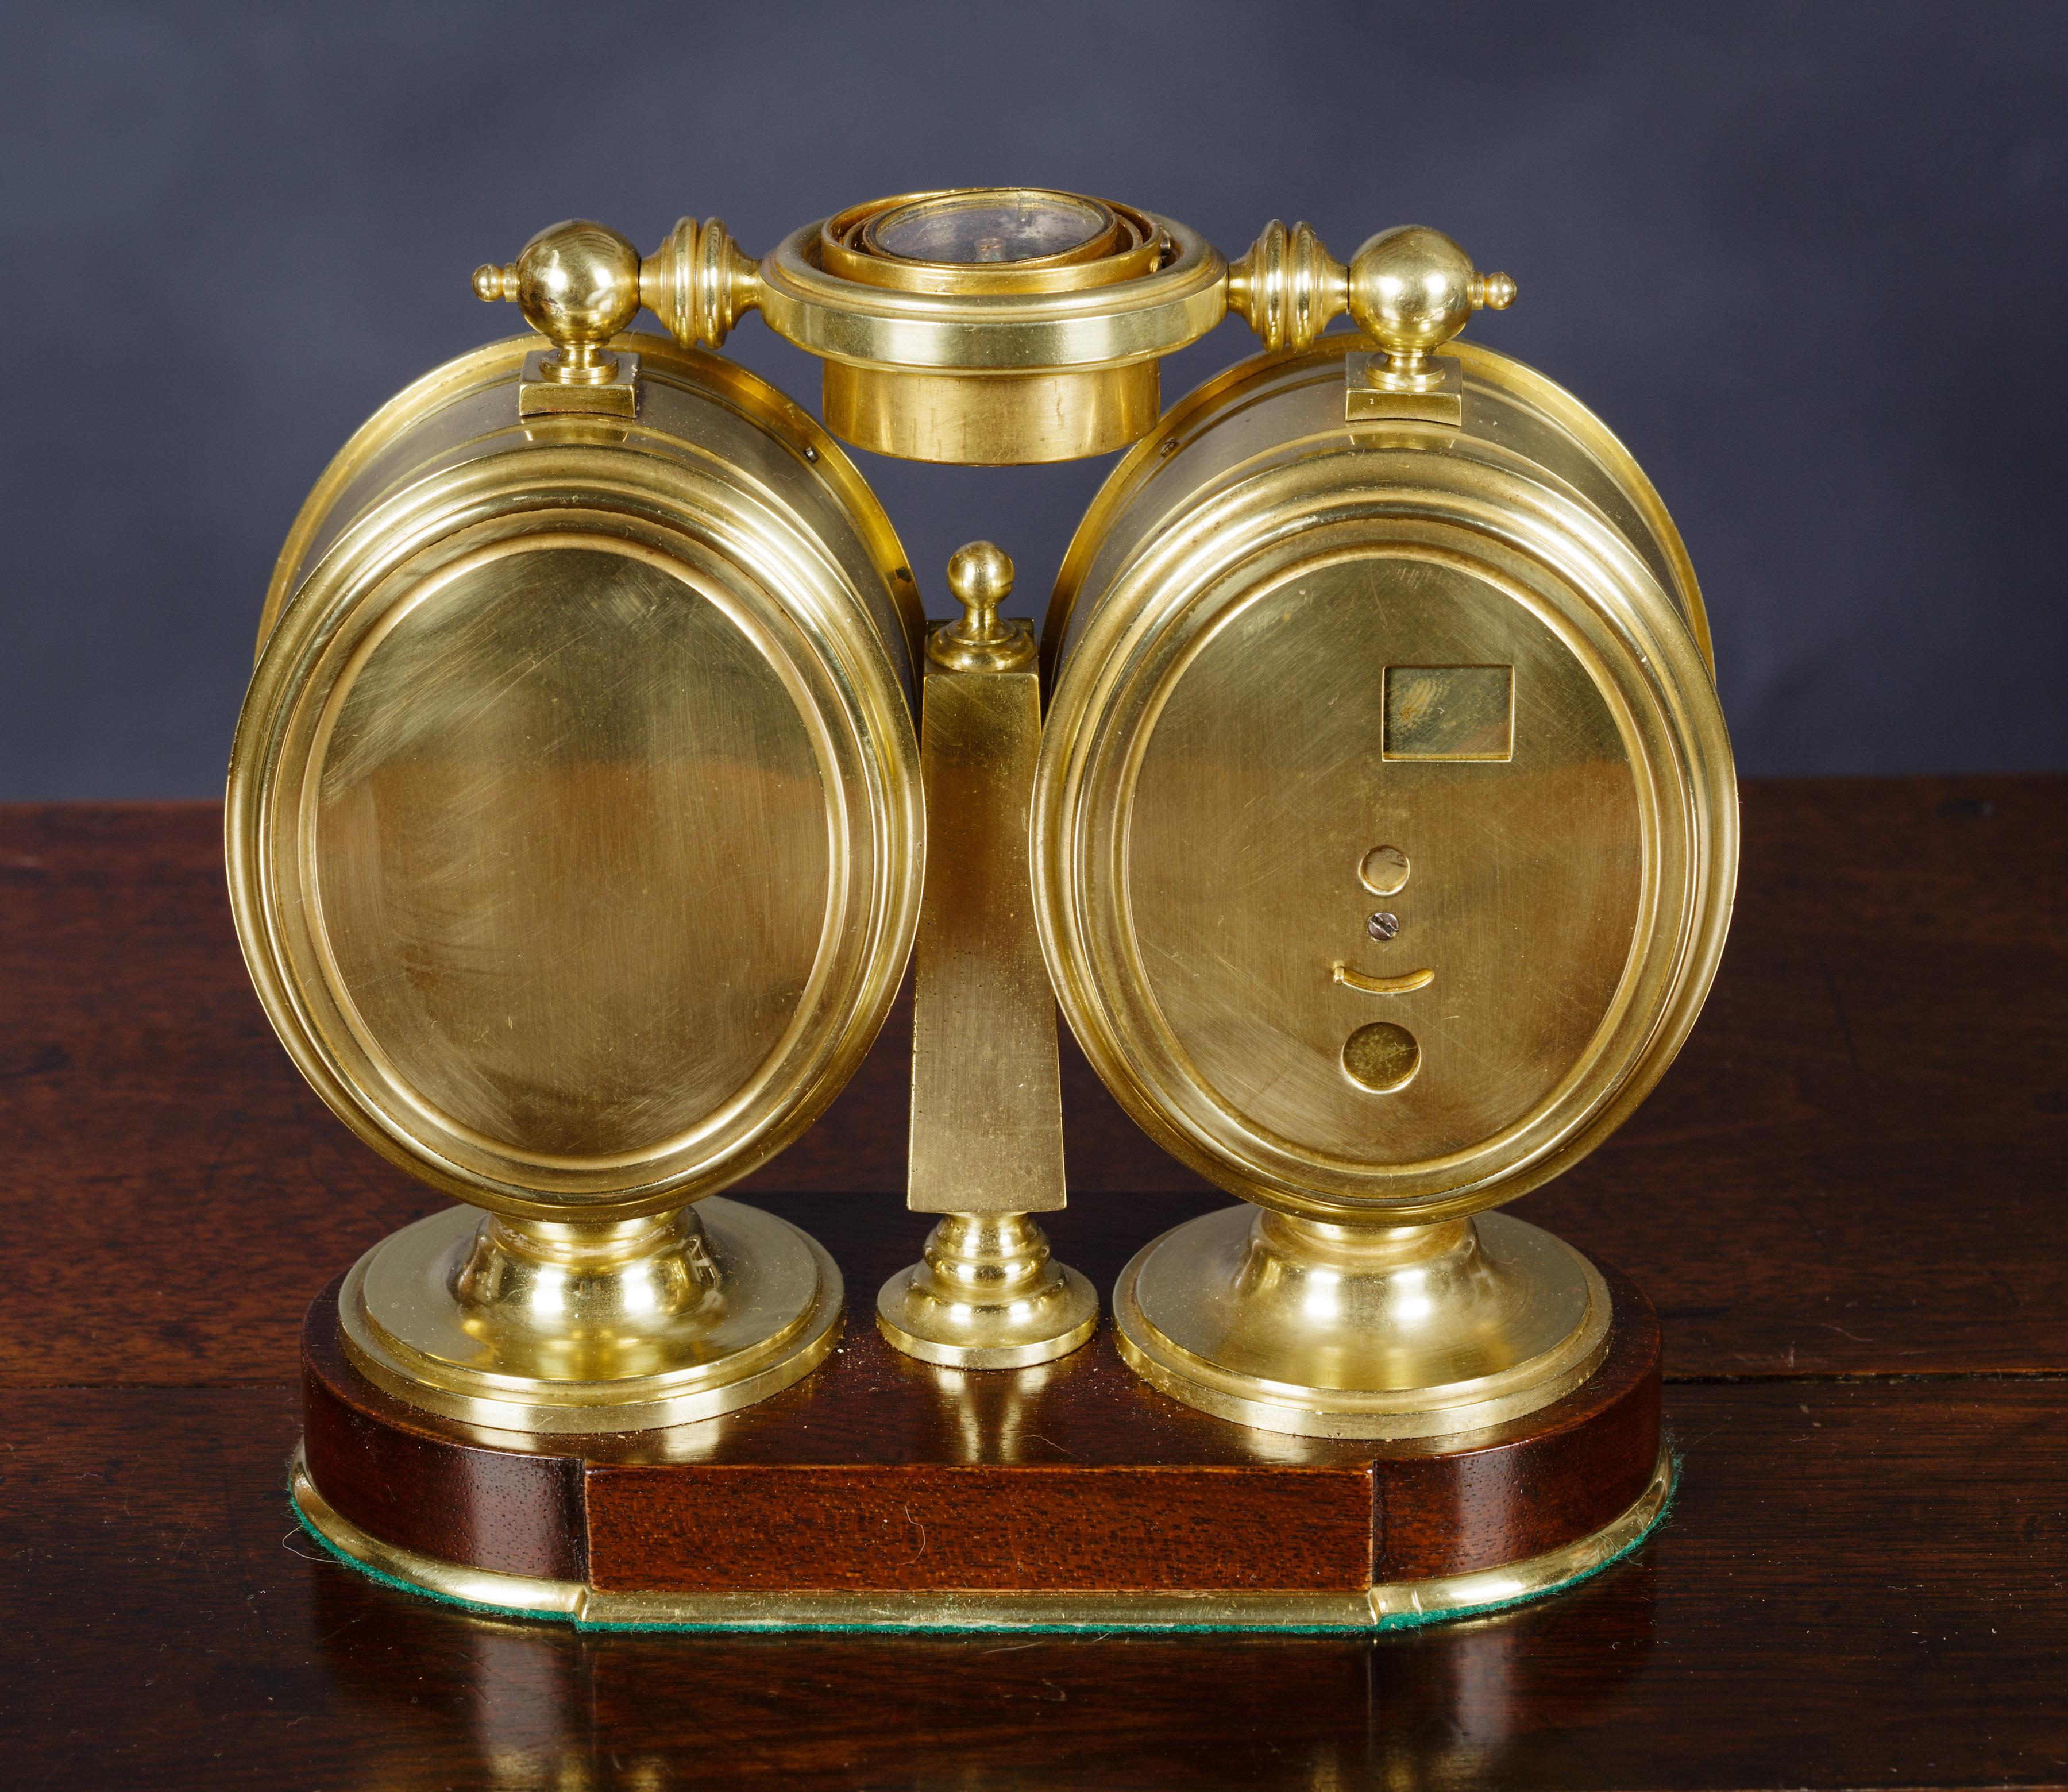 Victorian clock and barometer compendium

Clock and barometer compendium standing on a shaped brass bound mahogany base with an oval shaped clock to the left and an oval shaped barometer to the right, both with fine enamel dials.

A silvered